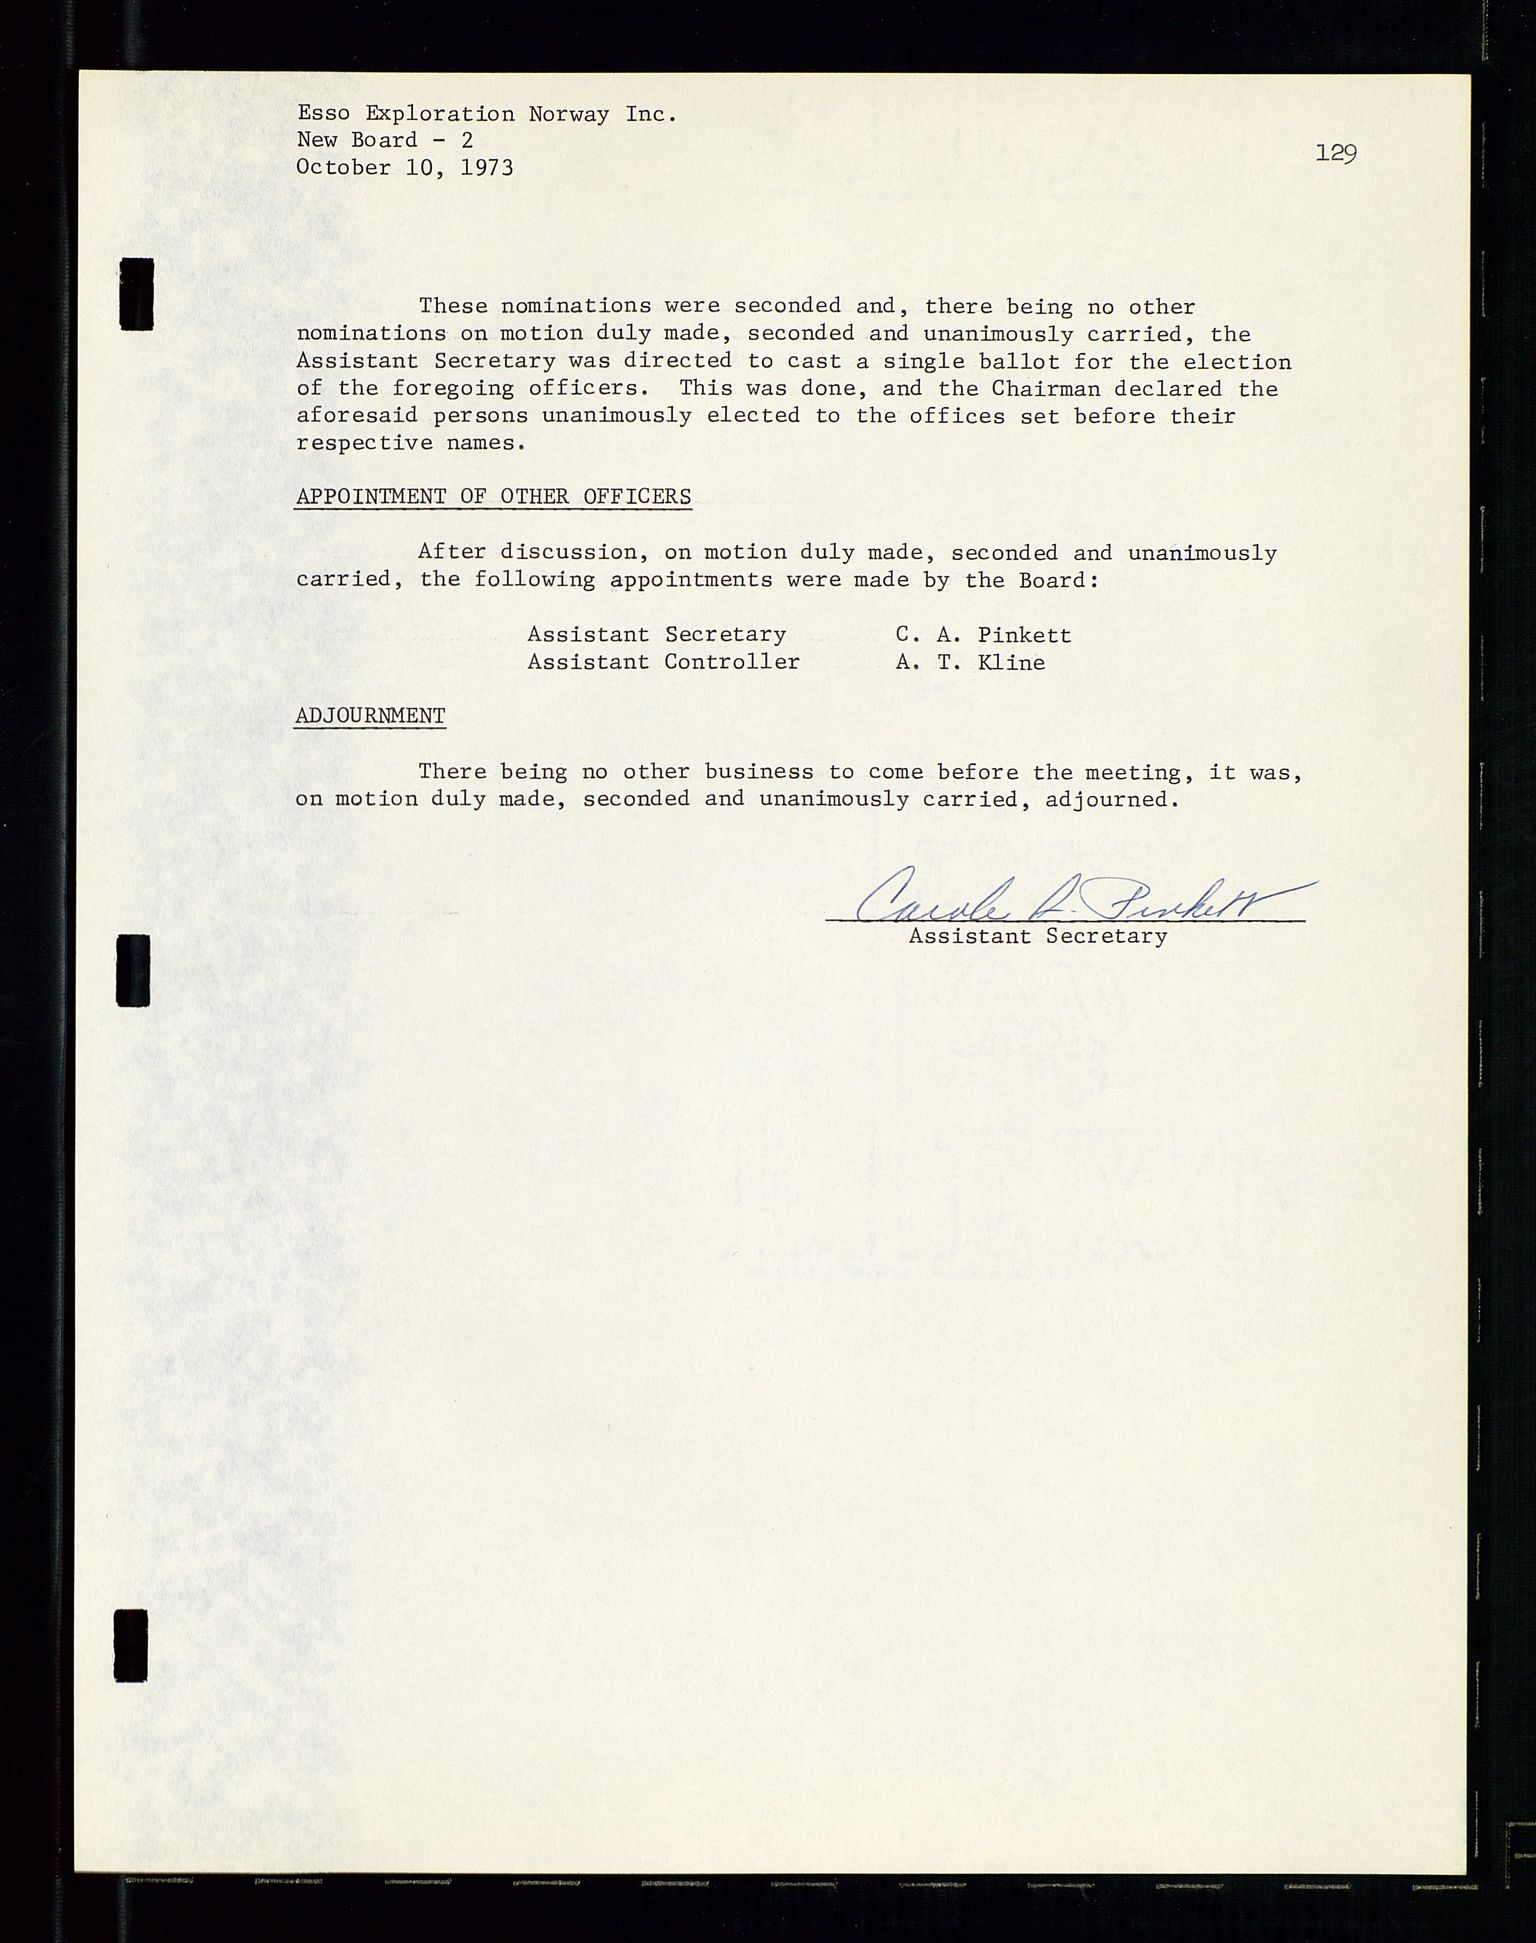 Pa 1512 - Esso Exploration and Production Norway Inc., SAST/A-101917/A/Aa/L0001/0001: Styredokumenter / Corporate records, By-Laws, Board meeting minutes, Incorporations, 1965-1975, s. 129